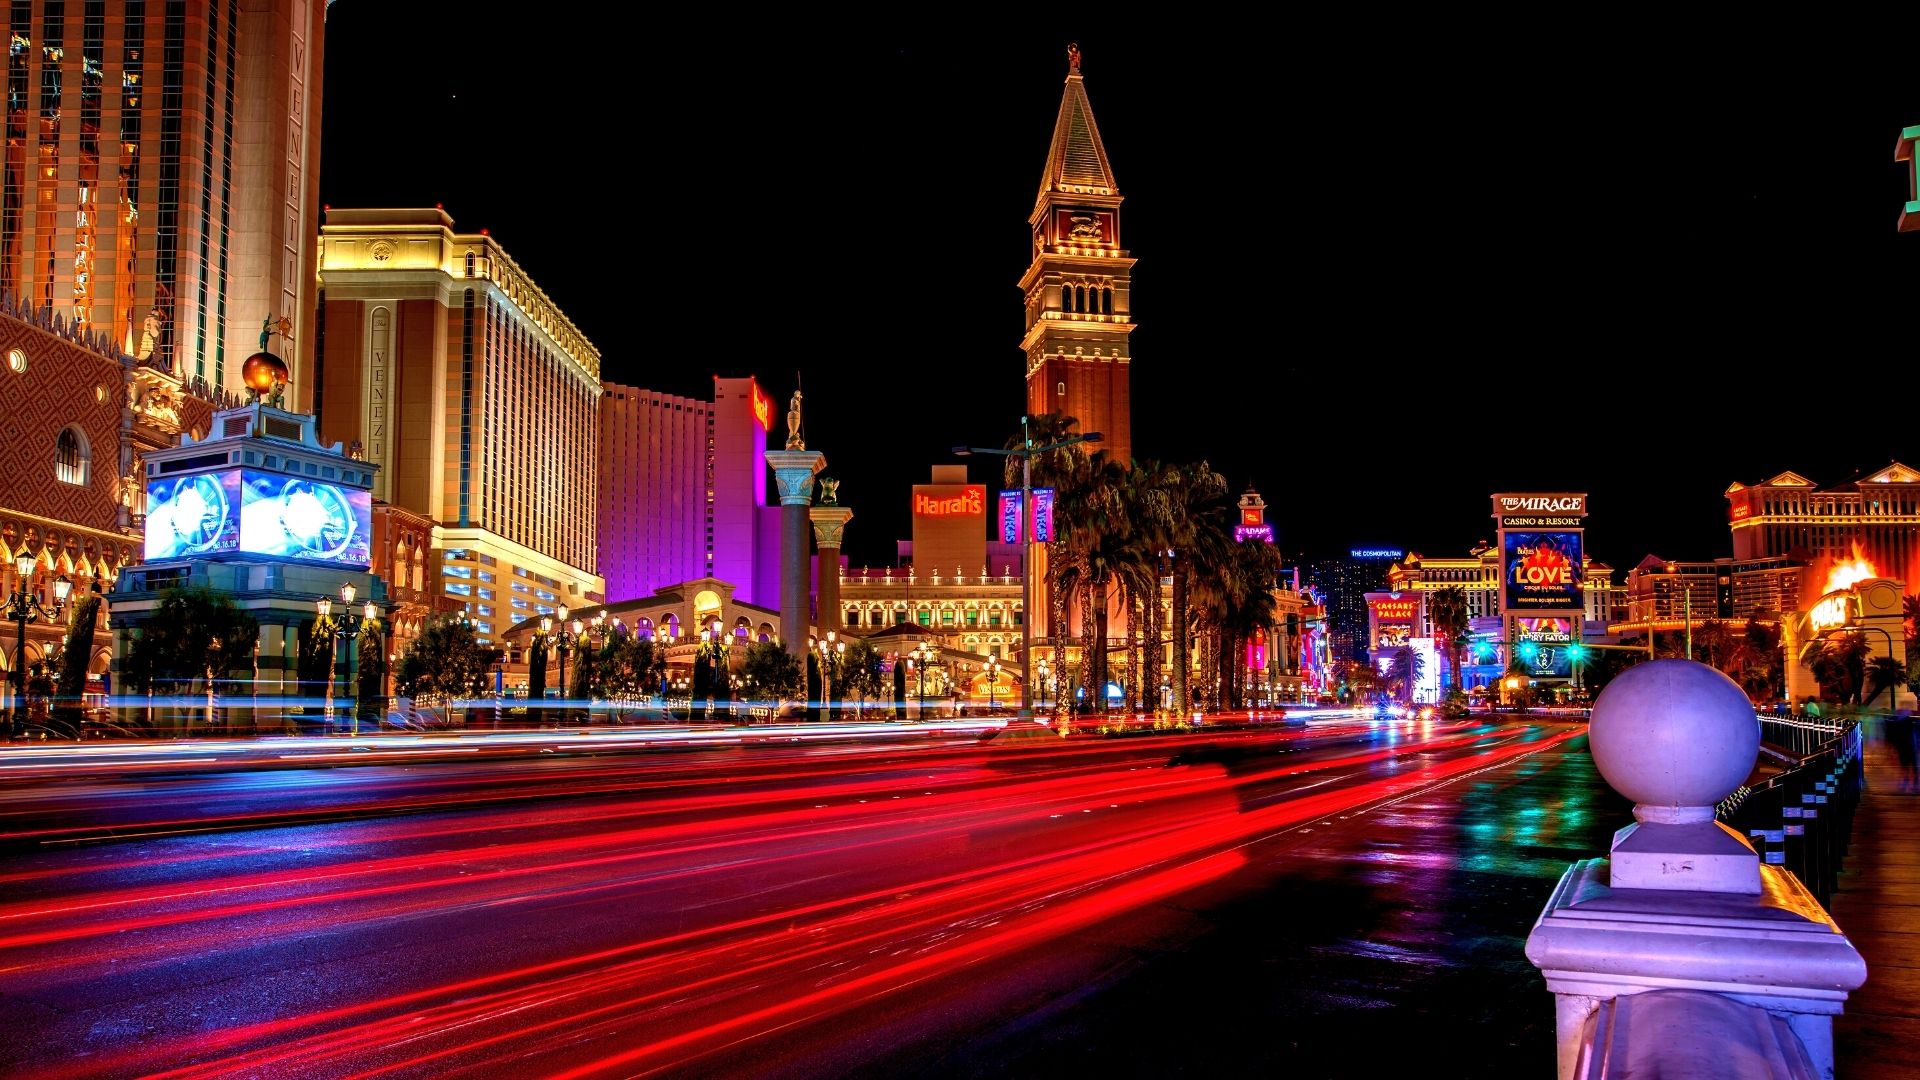 Vegas Hotels Use Pricing Scheme to Overcharge Guests